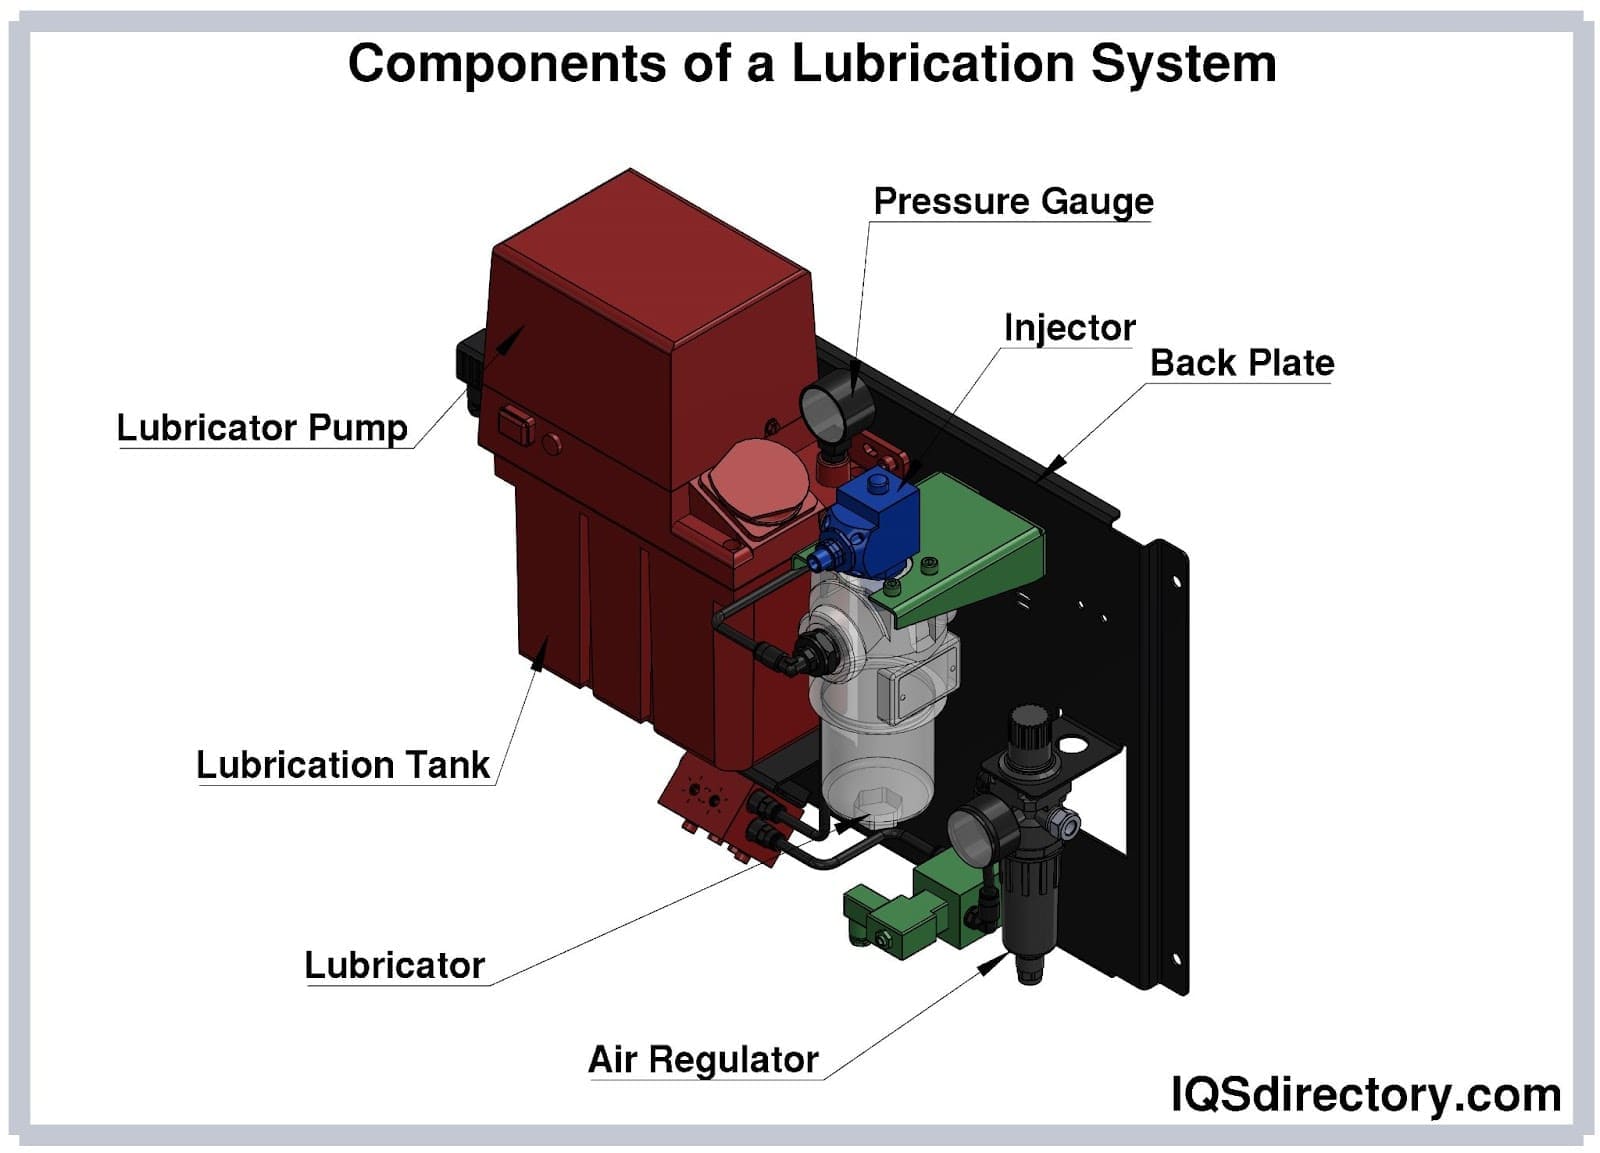 Components of a Lubrication System